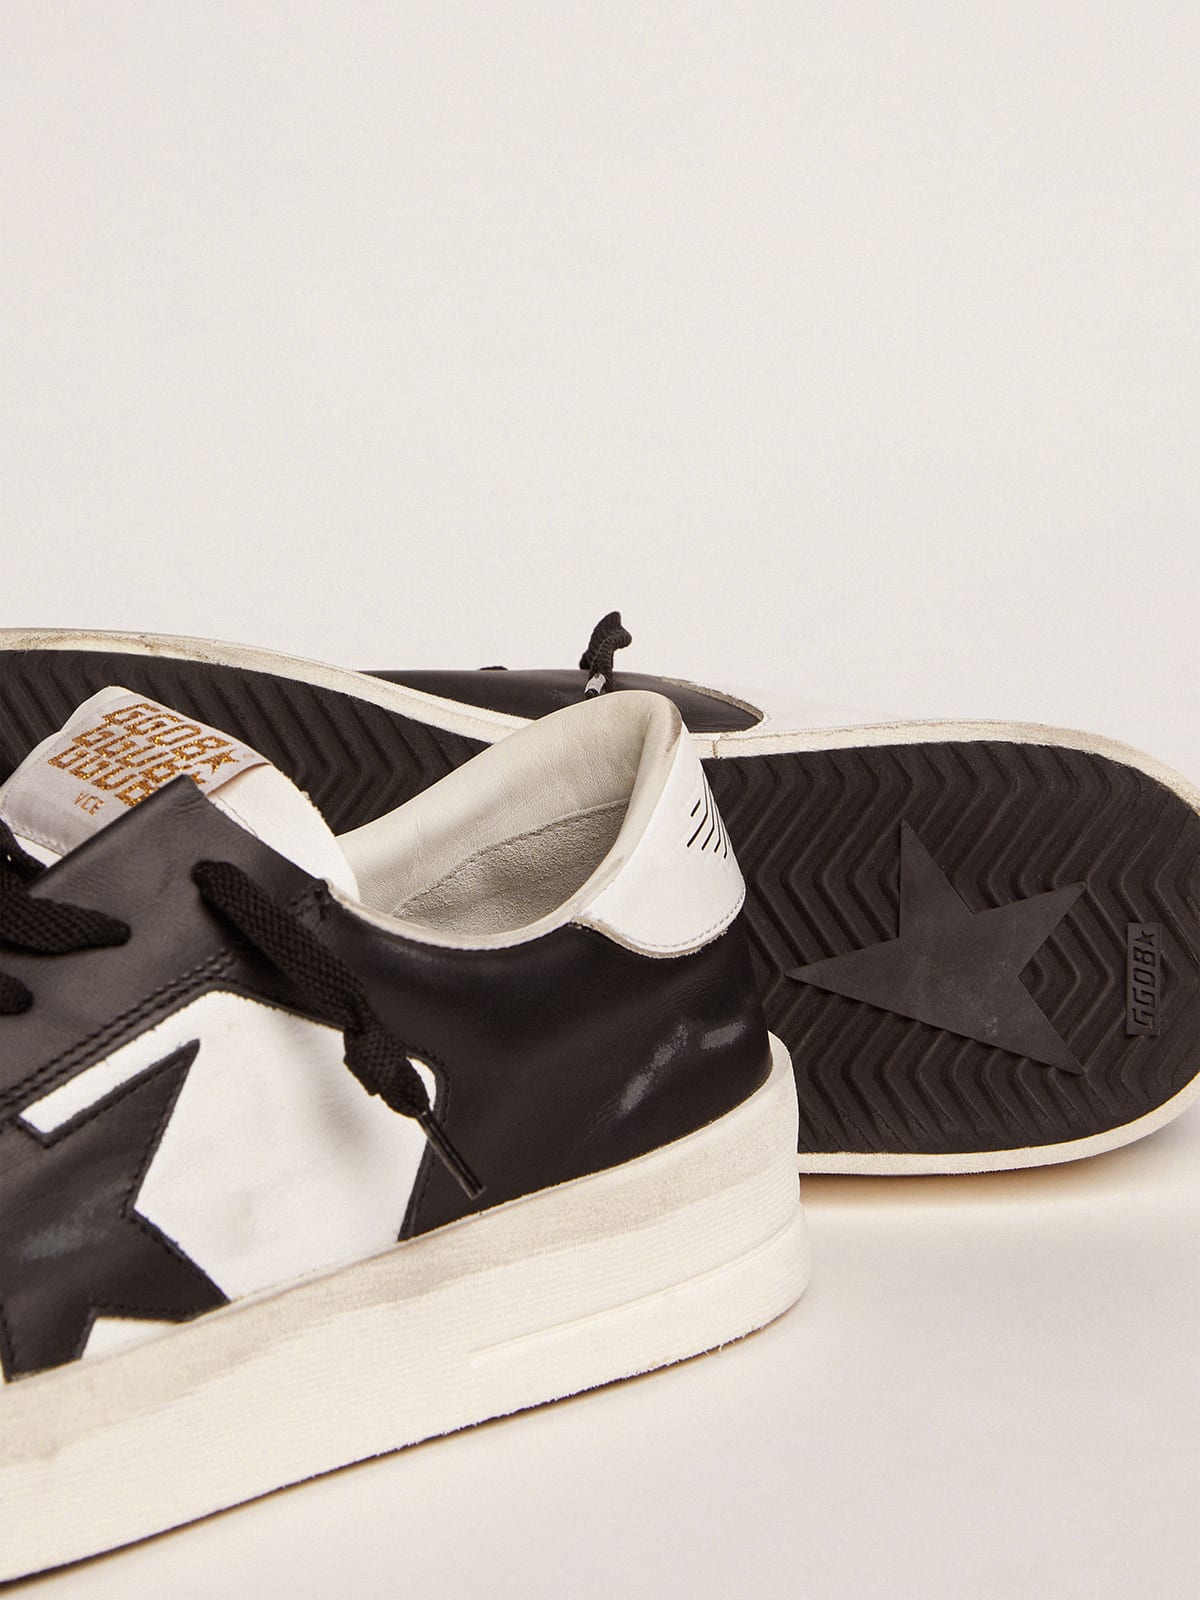 Golden Goose - Men’s Stardan sneakers in black and white leather in 